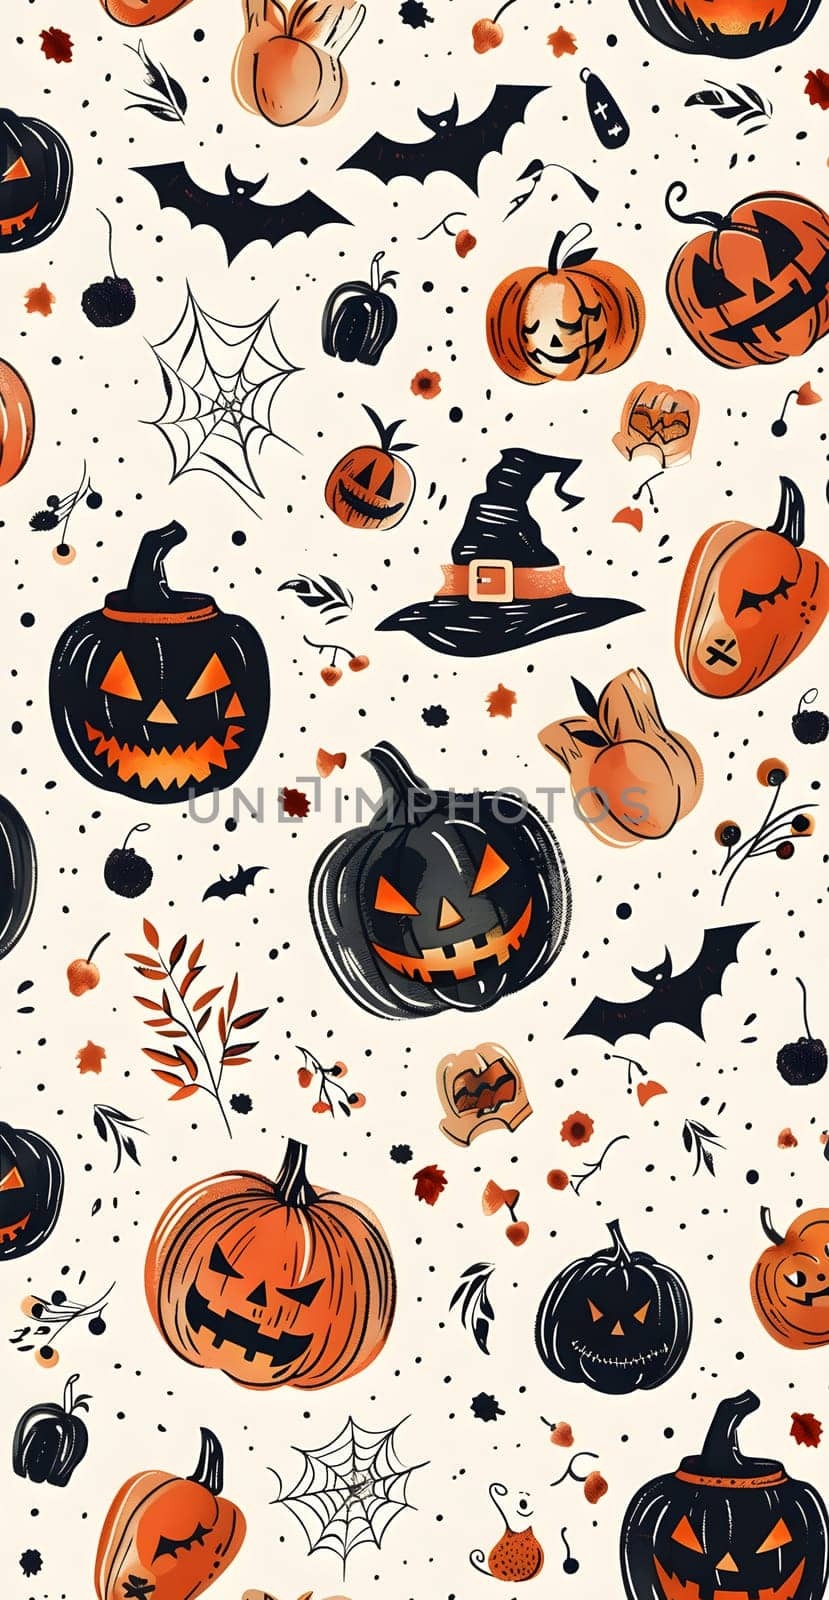 A vibrant seamless pattern of orange pumpkins, amber bats, spooky spiders, and fall leaves on a white background. This art features cucurbita vegetables in a circle gourd pattern